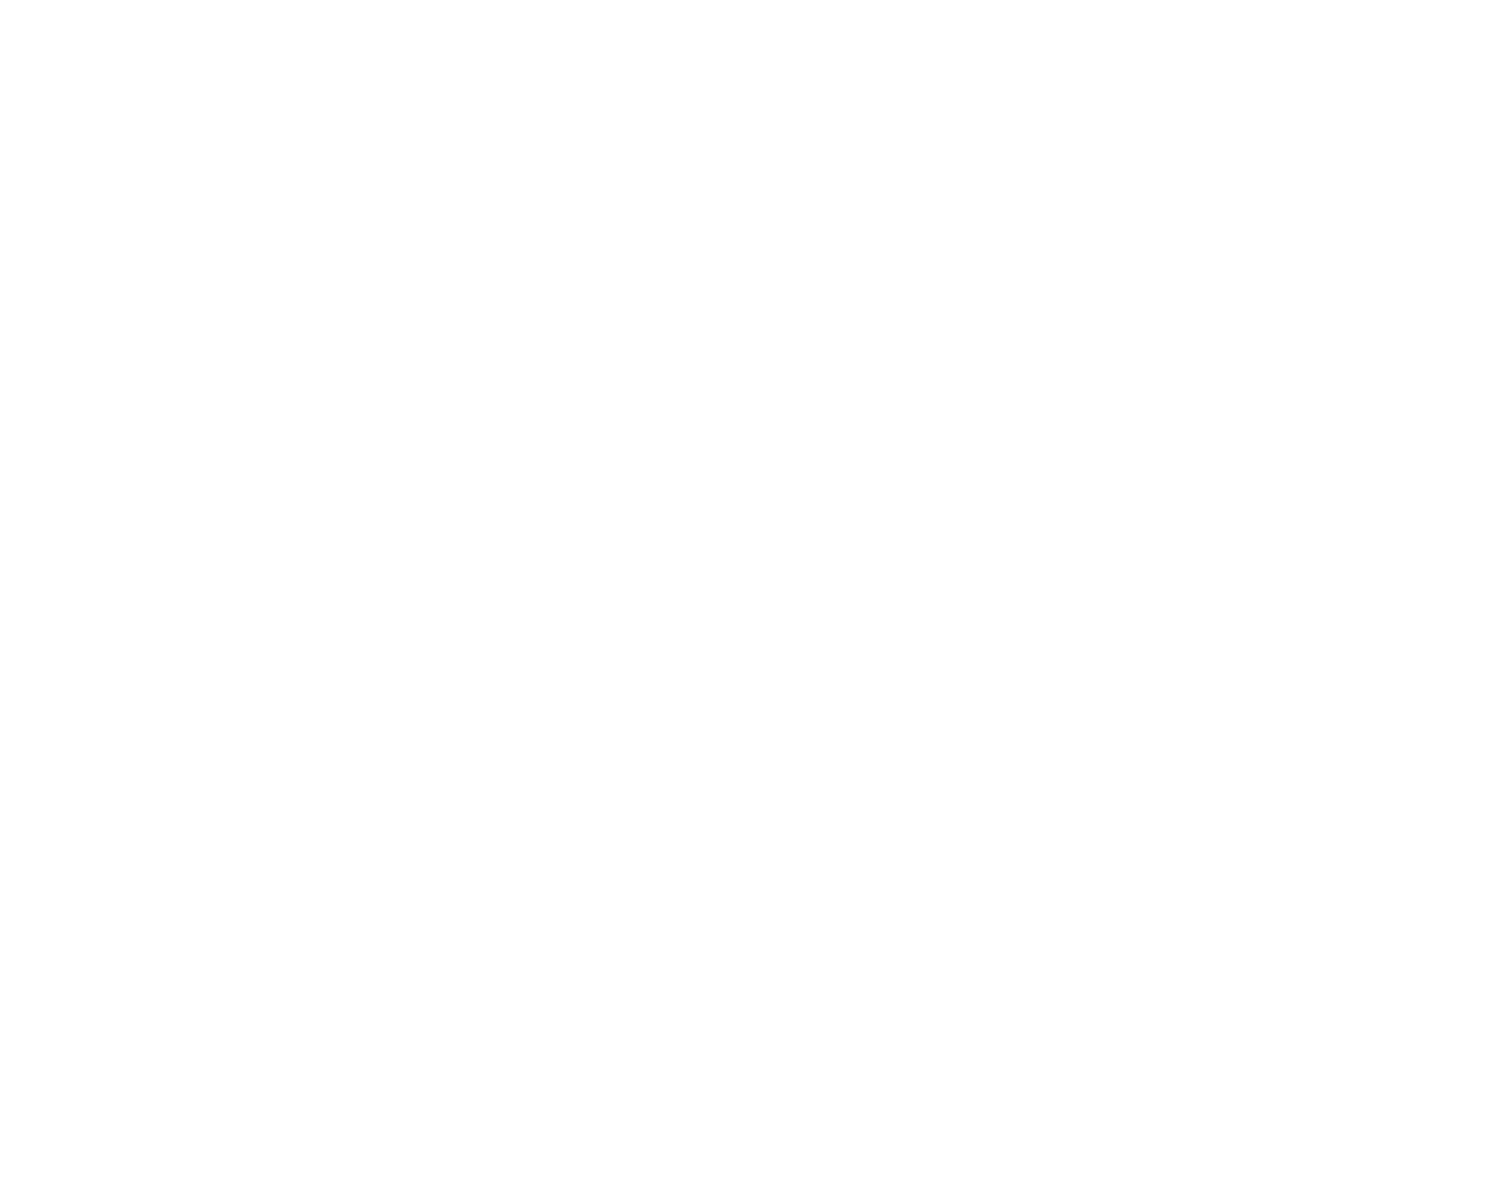 Right to Wellbeing 2025